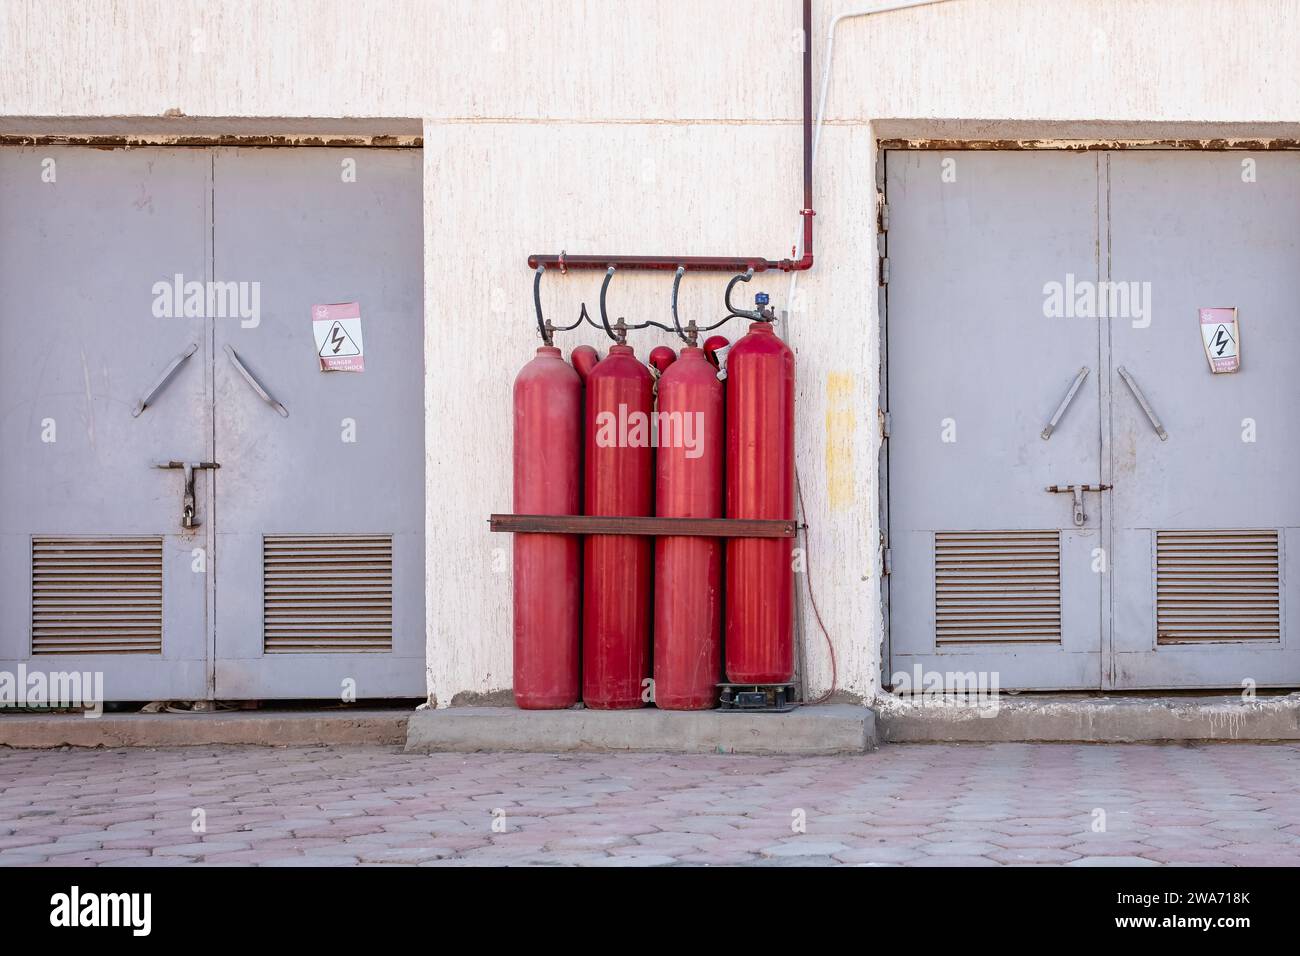 Gas Fire Suppression system of outdoor switchgear for an electrical substation. Fire gas cylinders by the wall. Nobody, street photo Stock Photo